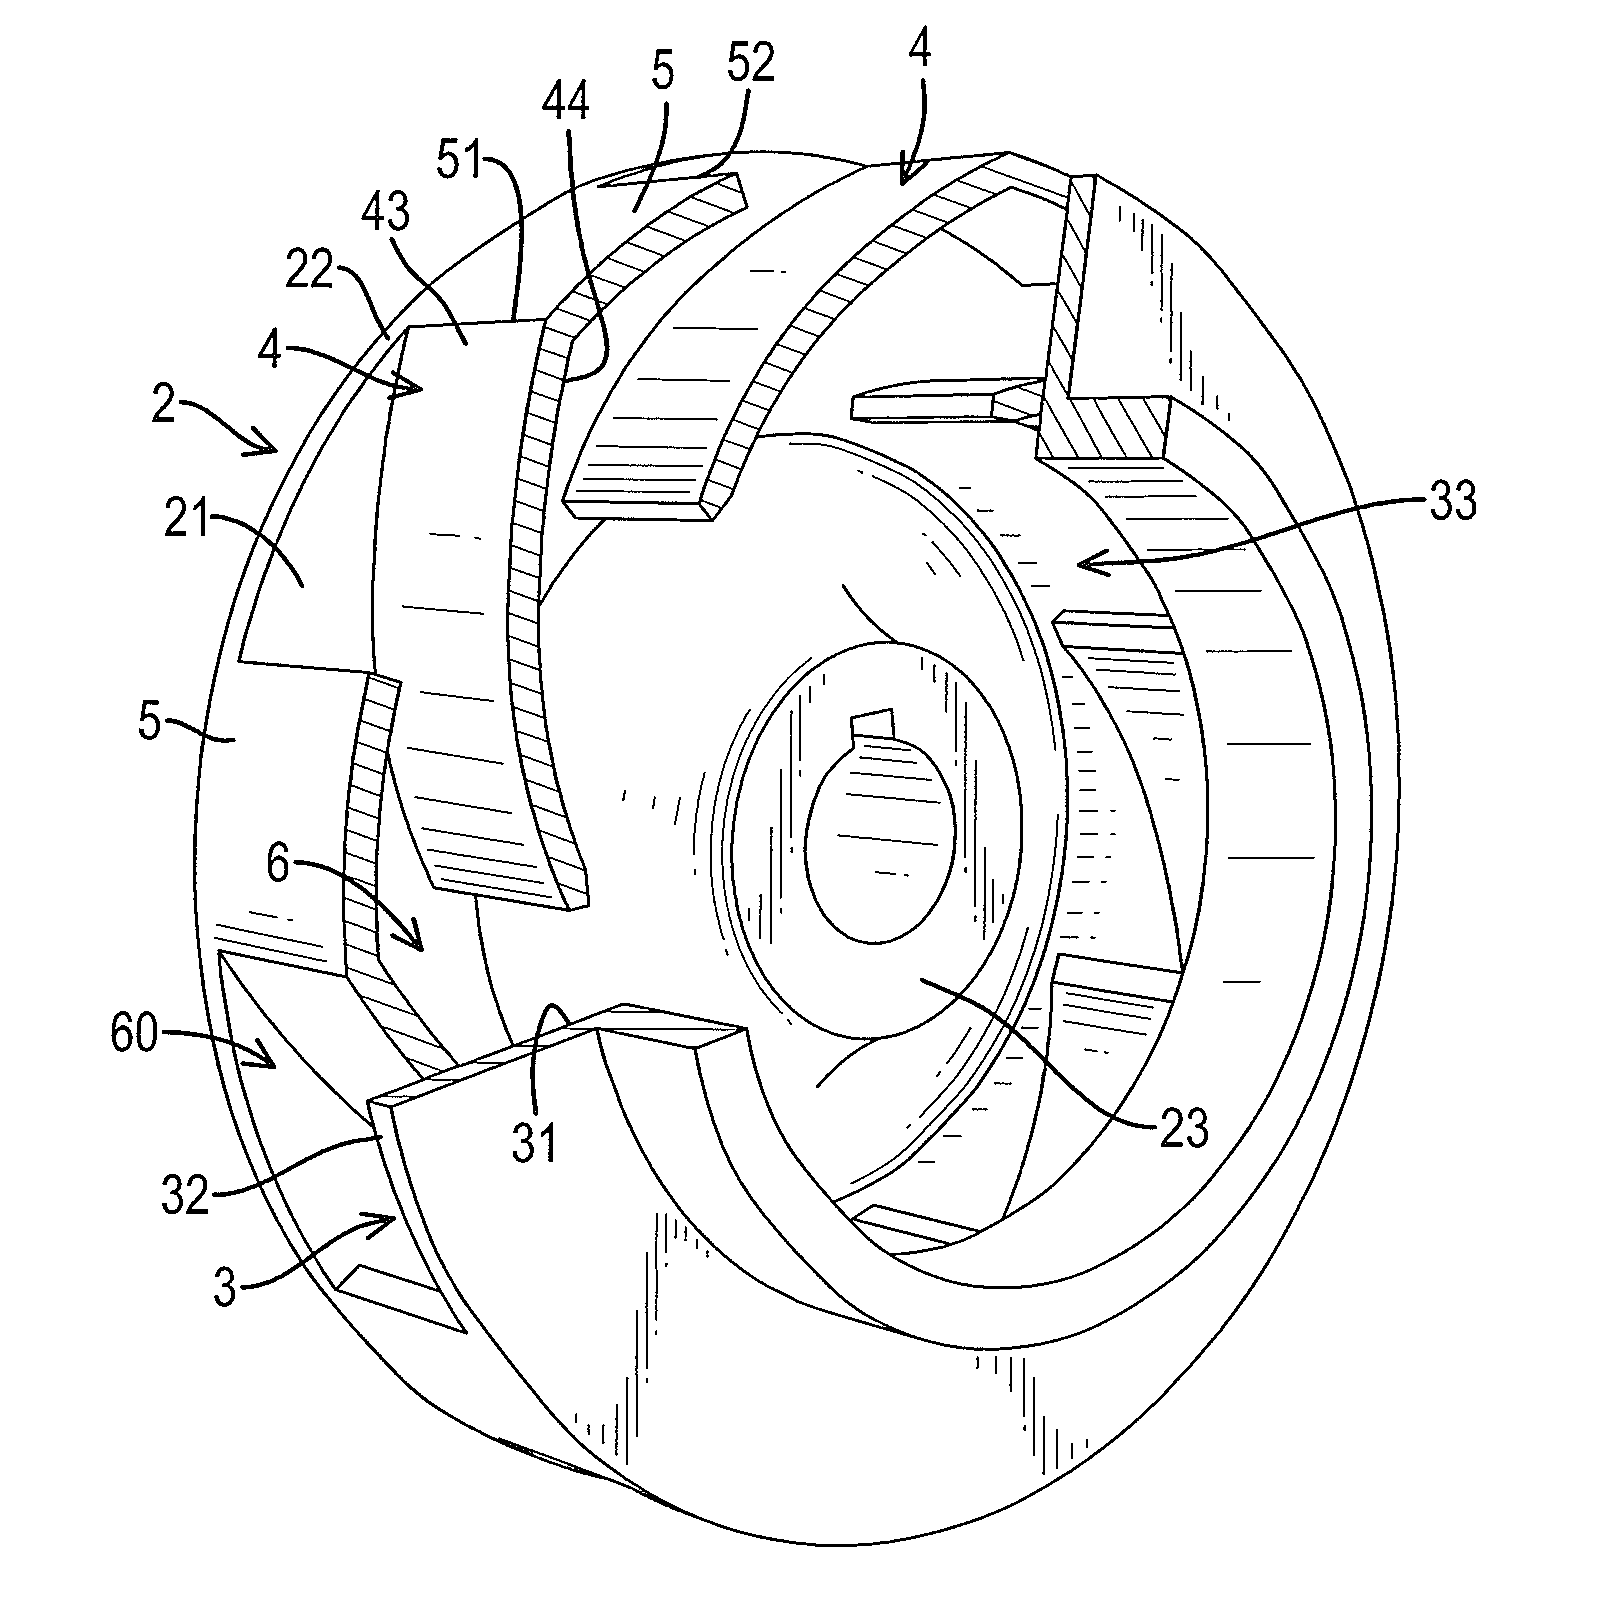 Low-Turbulence Impeller for a Fluid Pump